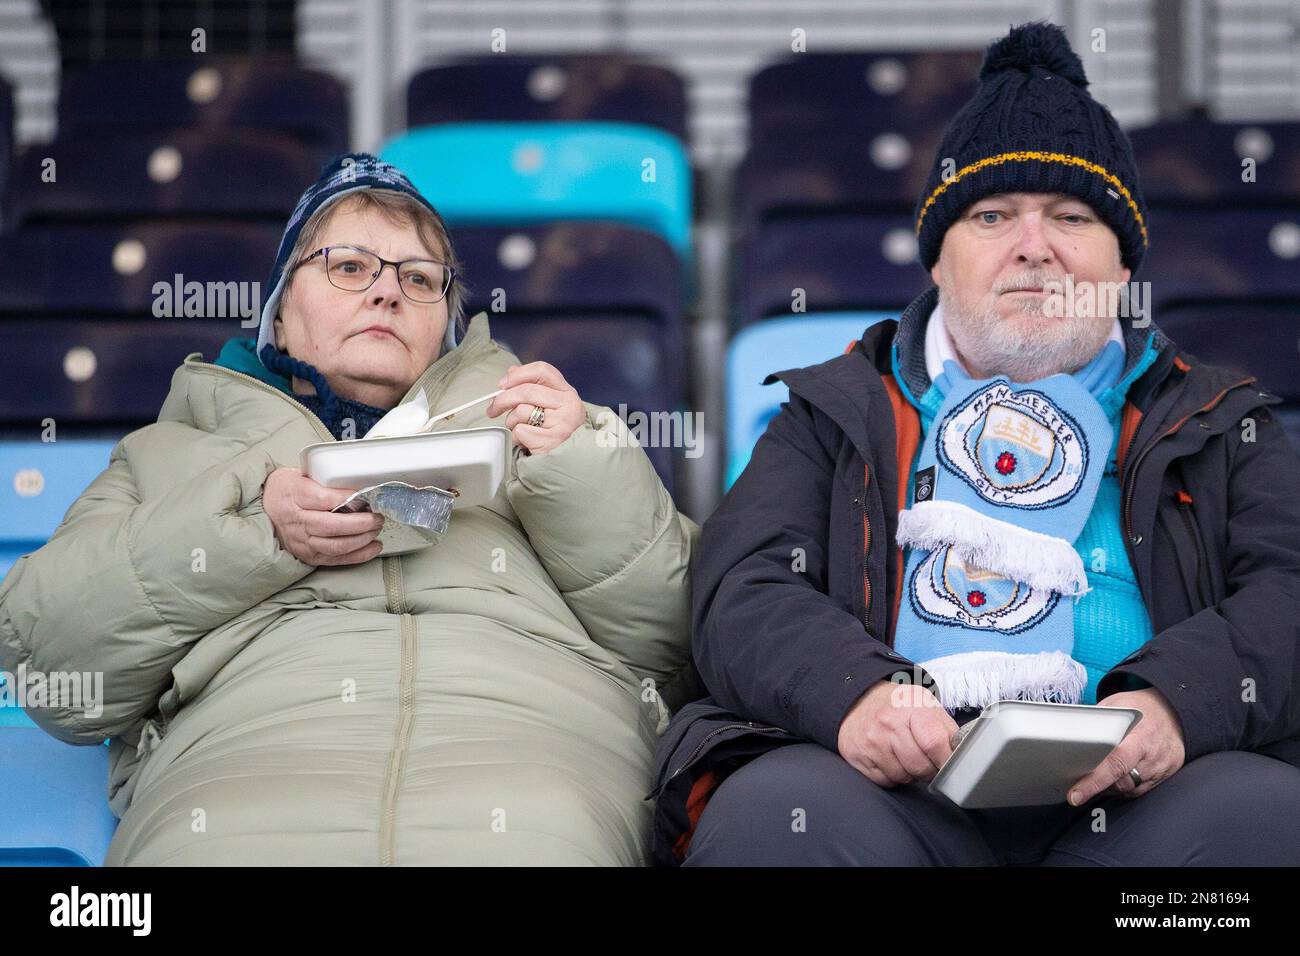 Manchester City fans during the Barclays FA Women's Super League match between Manchester City and Arsenal at the Academy Stadium, Manchester on Saturday 11th February 2023. (Photo: Mike Morese | MI News) Credit: MI News & Sport /Alamy Live News Stock Photo